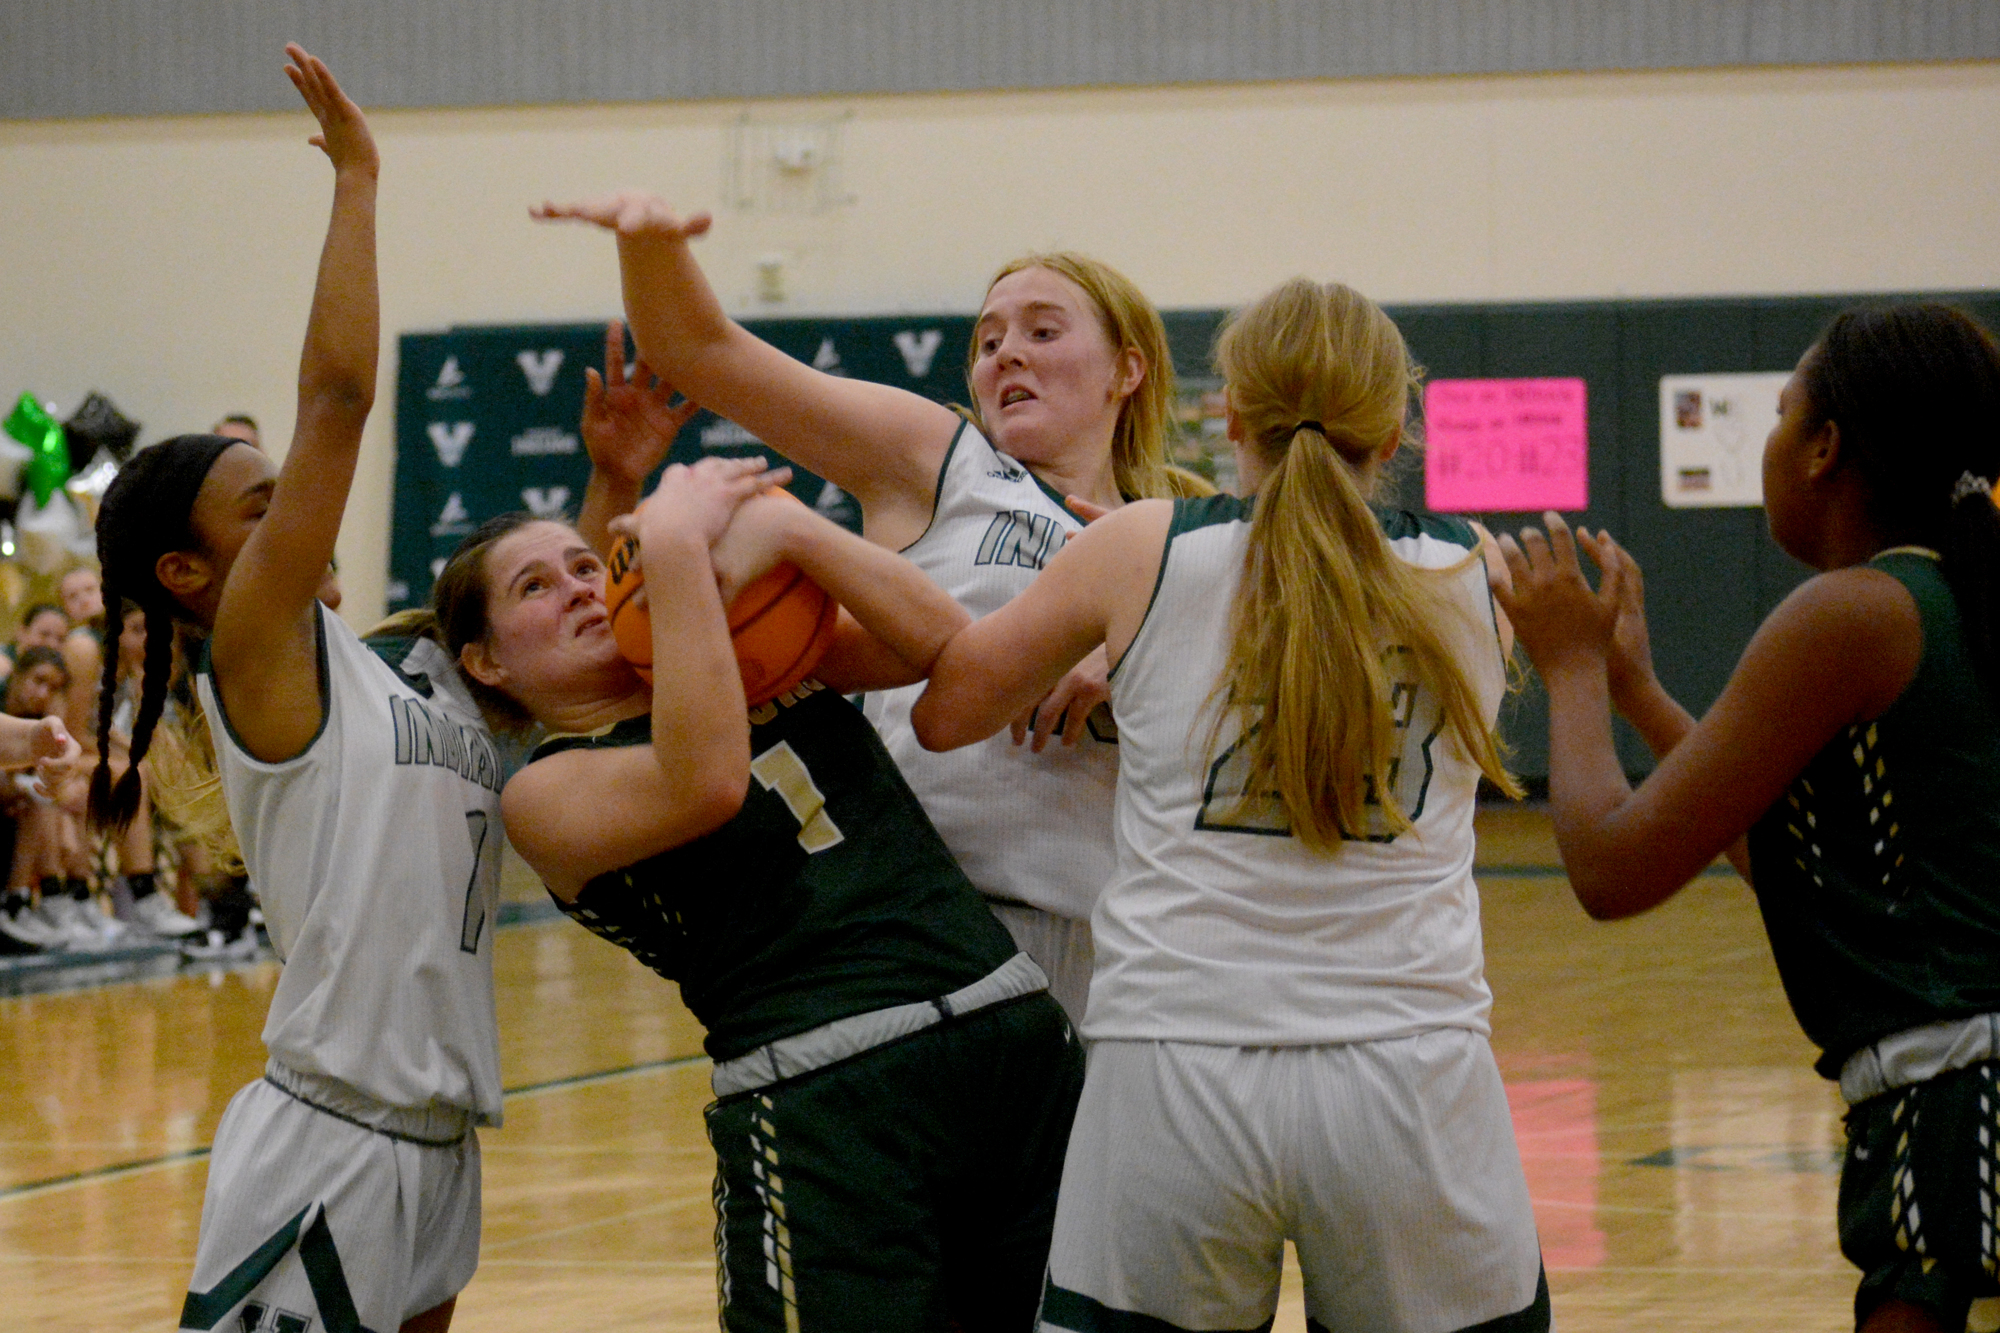 Despite being a guard, Jamie Springstead often plays in the post, using her physicality to her advantage. Here she grabs a rebound through Veince's Addison Ivery, Jayda Lanham and Ella Opsatnick.